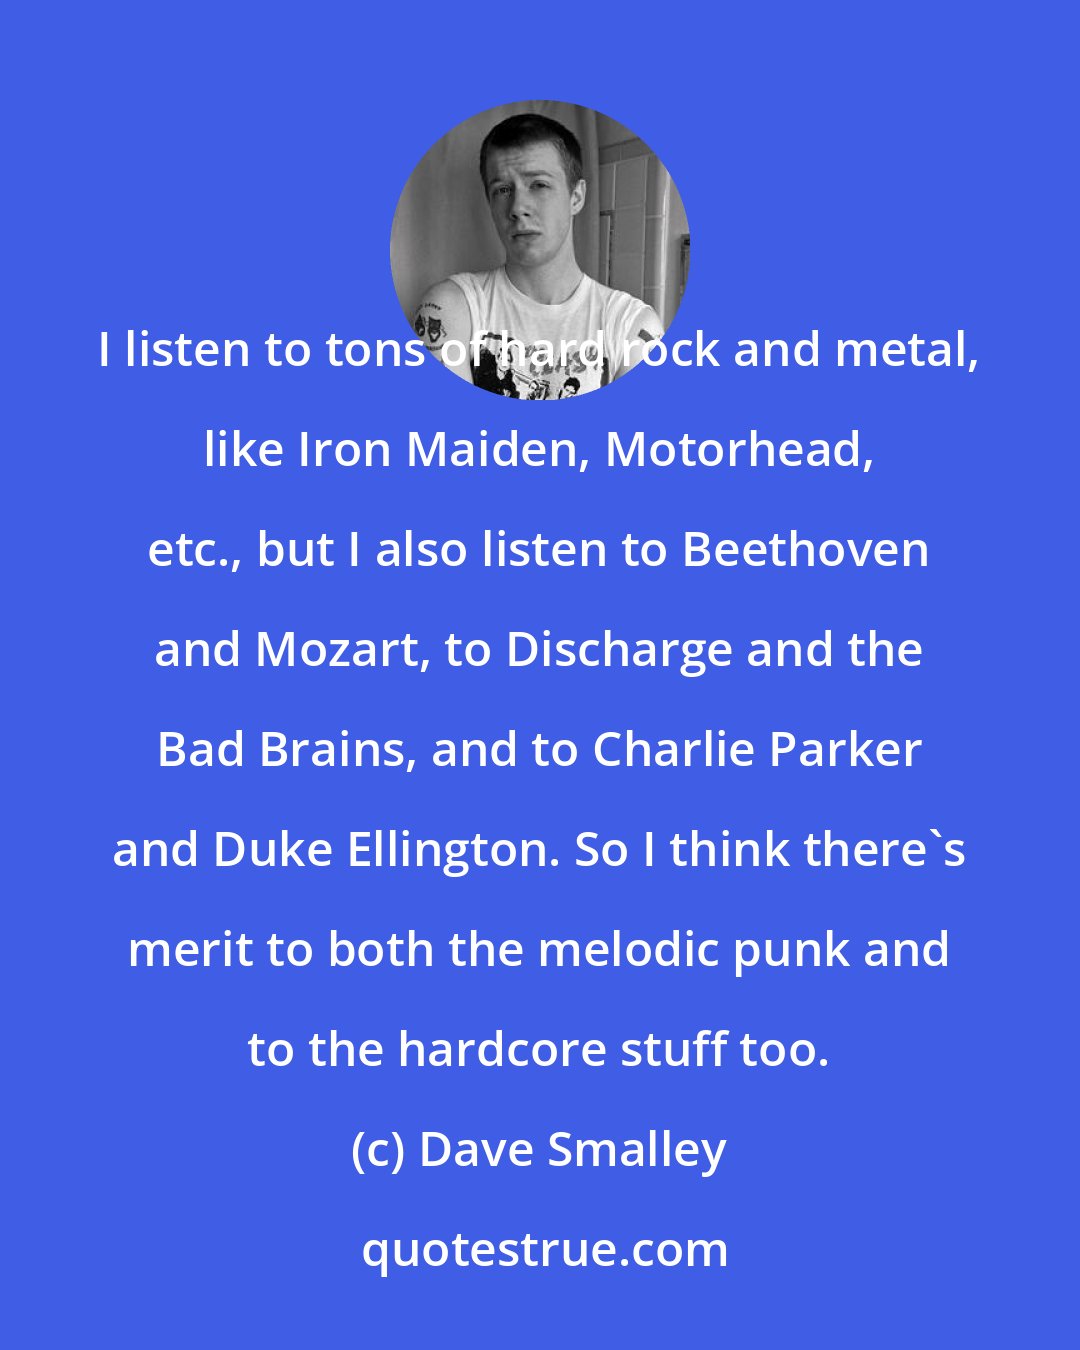 Dave Smalley: I listen to tons of hard rock and metal, like Iron Maiden, Motorhead, etc., but I also listen to Beethoven and Mozart, to Discharge and the Bad Brains, and to Charlie Parker and Duke Ellington. So I think there's merit to both the melodic punk and to the hardcore stuff too.